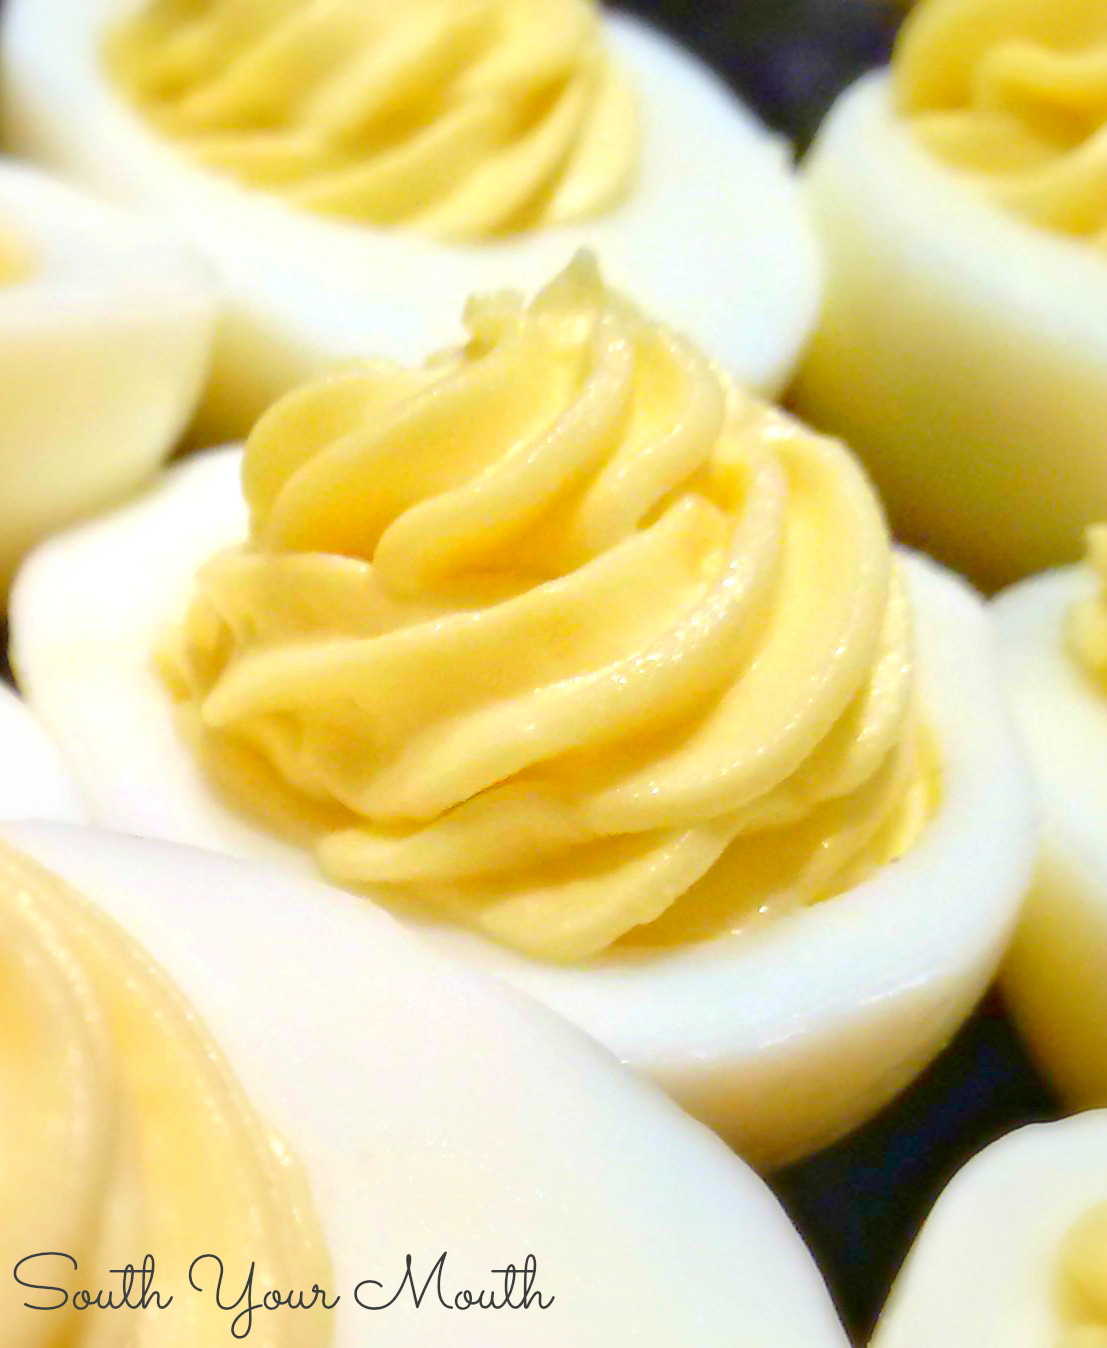 What is a simple recipe for deviled eggs using mustard?